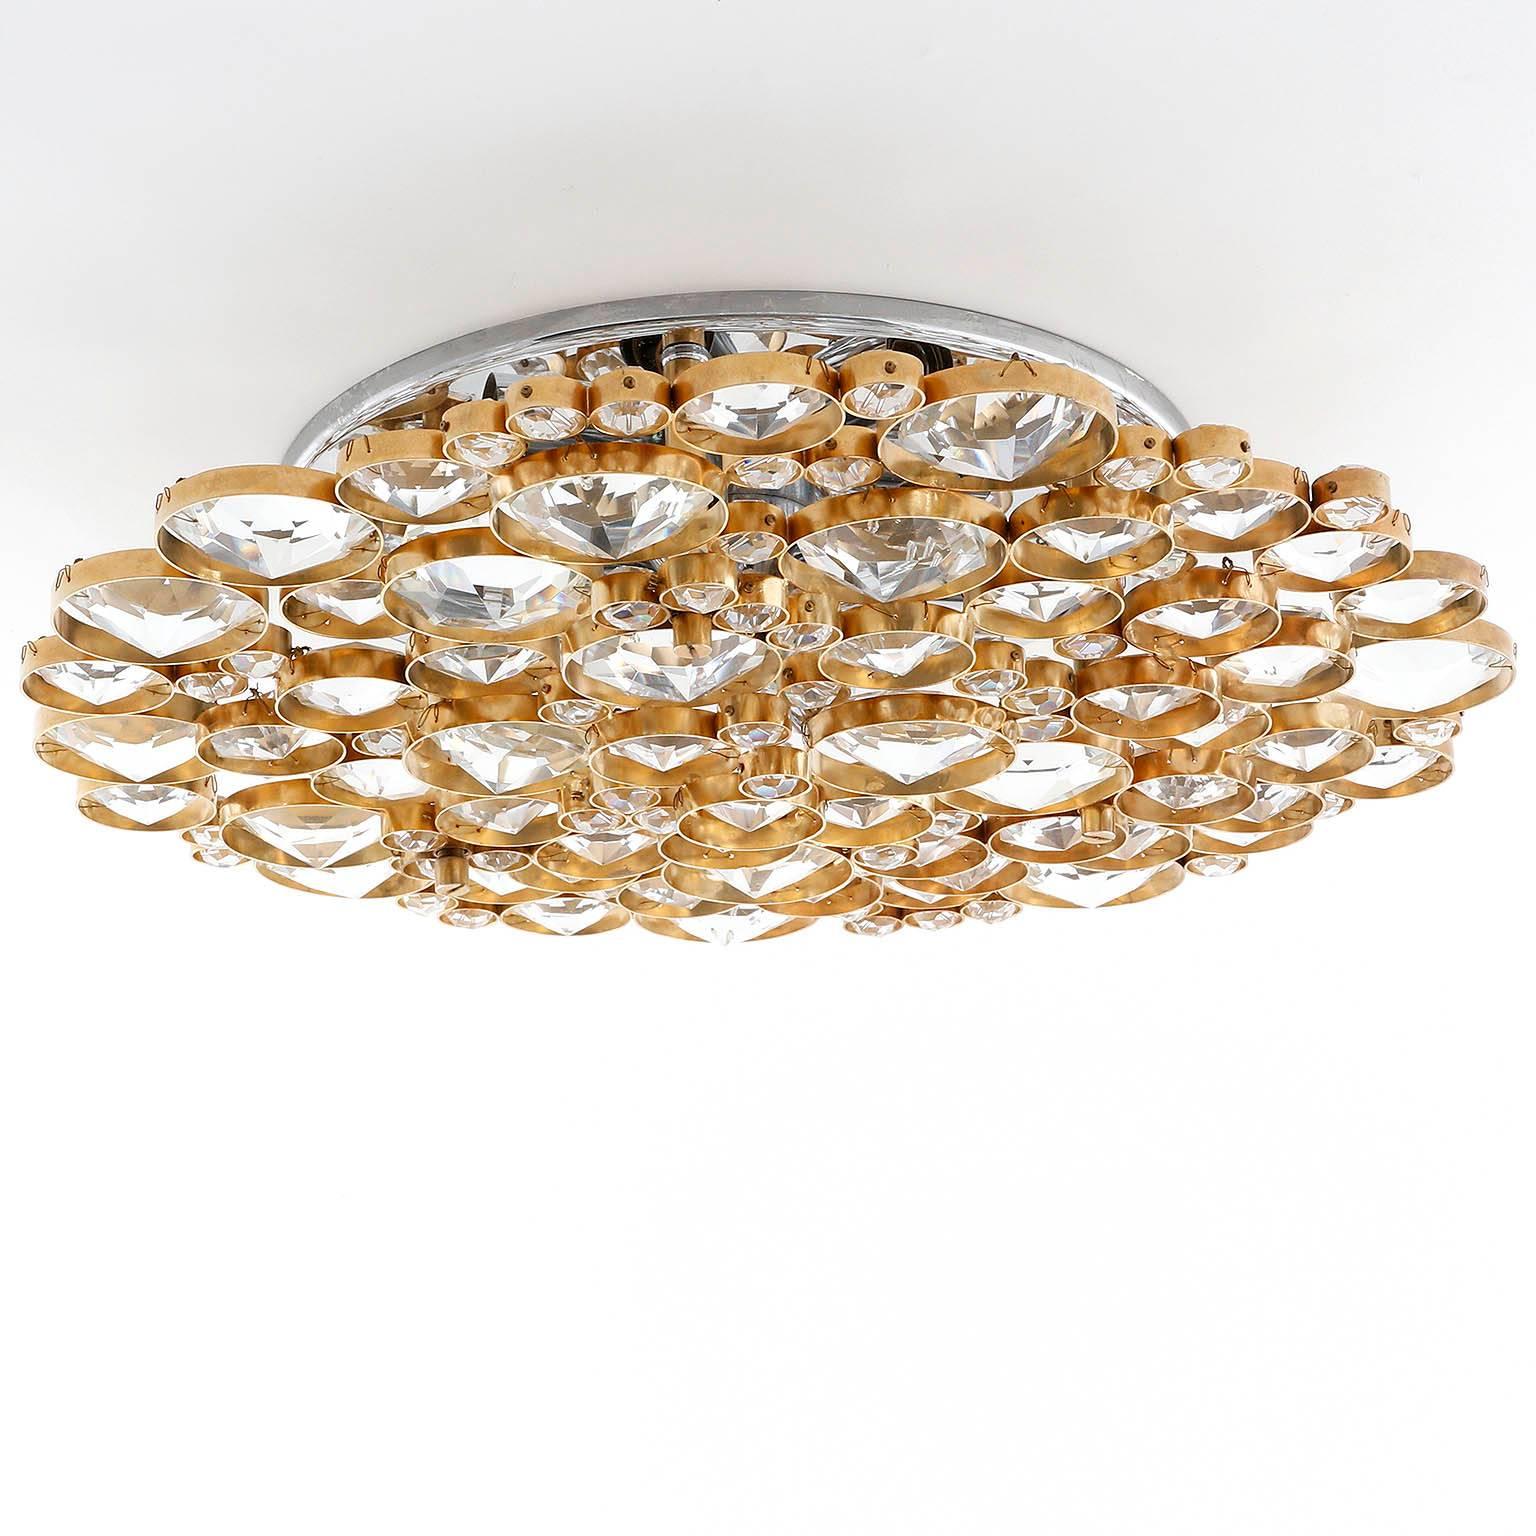 A unique and high quality flush mount light or wall light fixture by Bakalowits & Soehne, Austria, manufactured in Mid-Century, circa 1960.
The lamp is made of a brass and nickel frame decorated with hand cut crystal glasses. The crystals are in